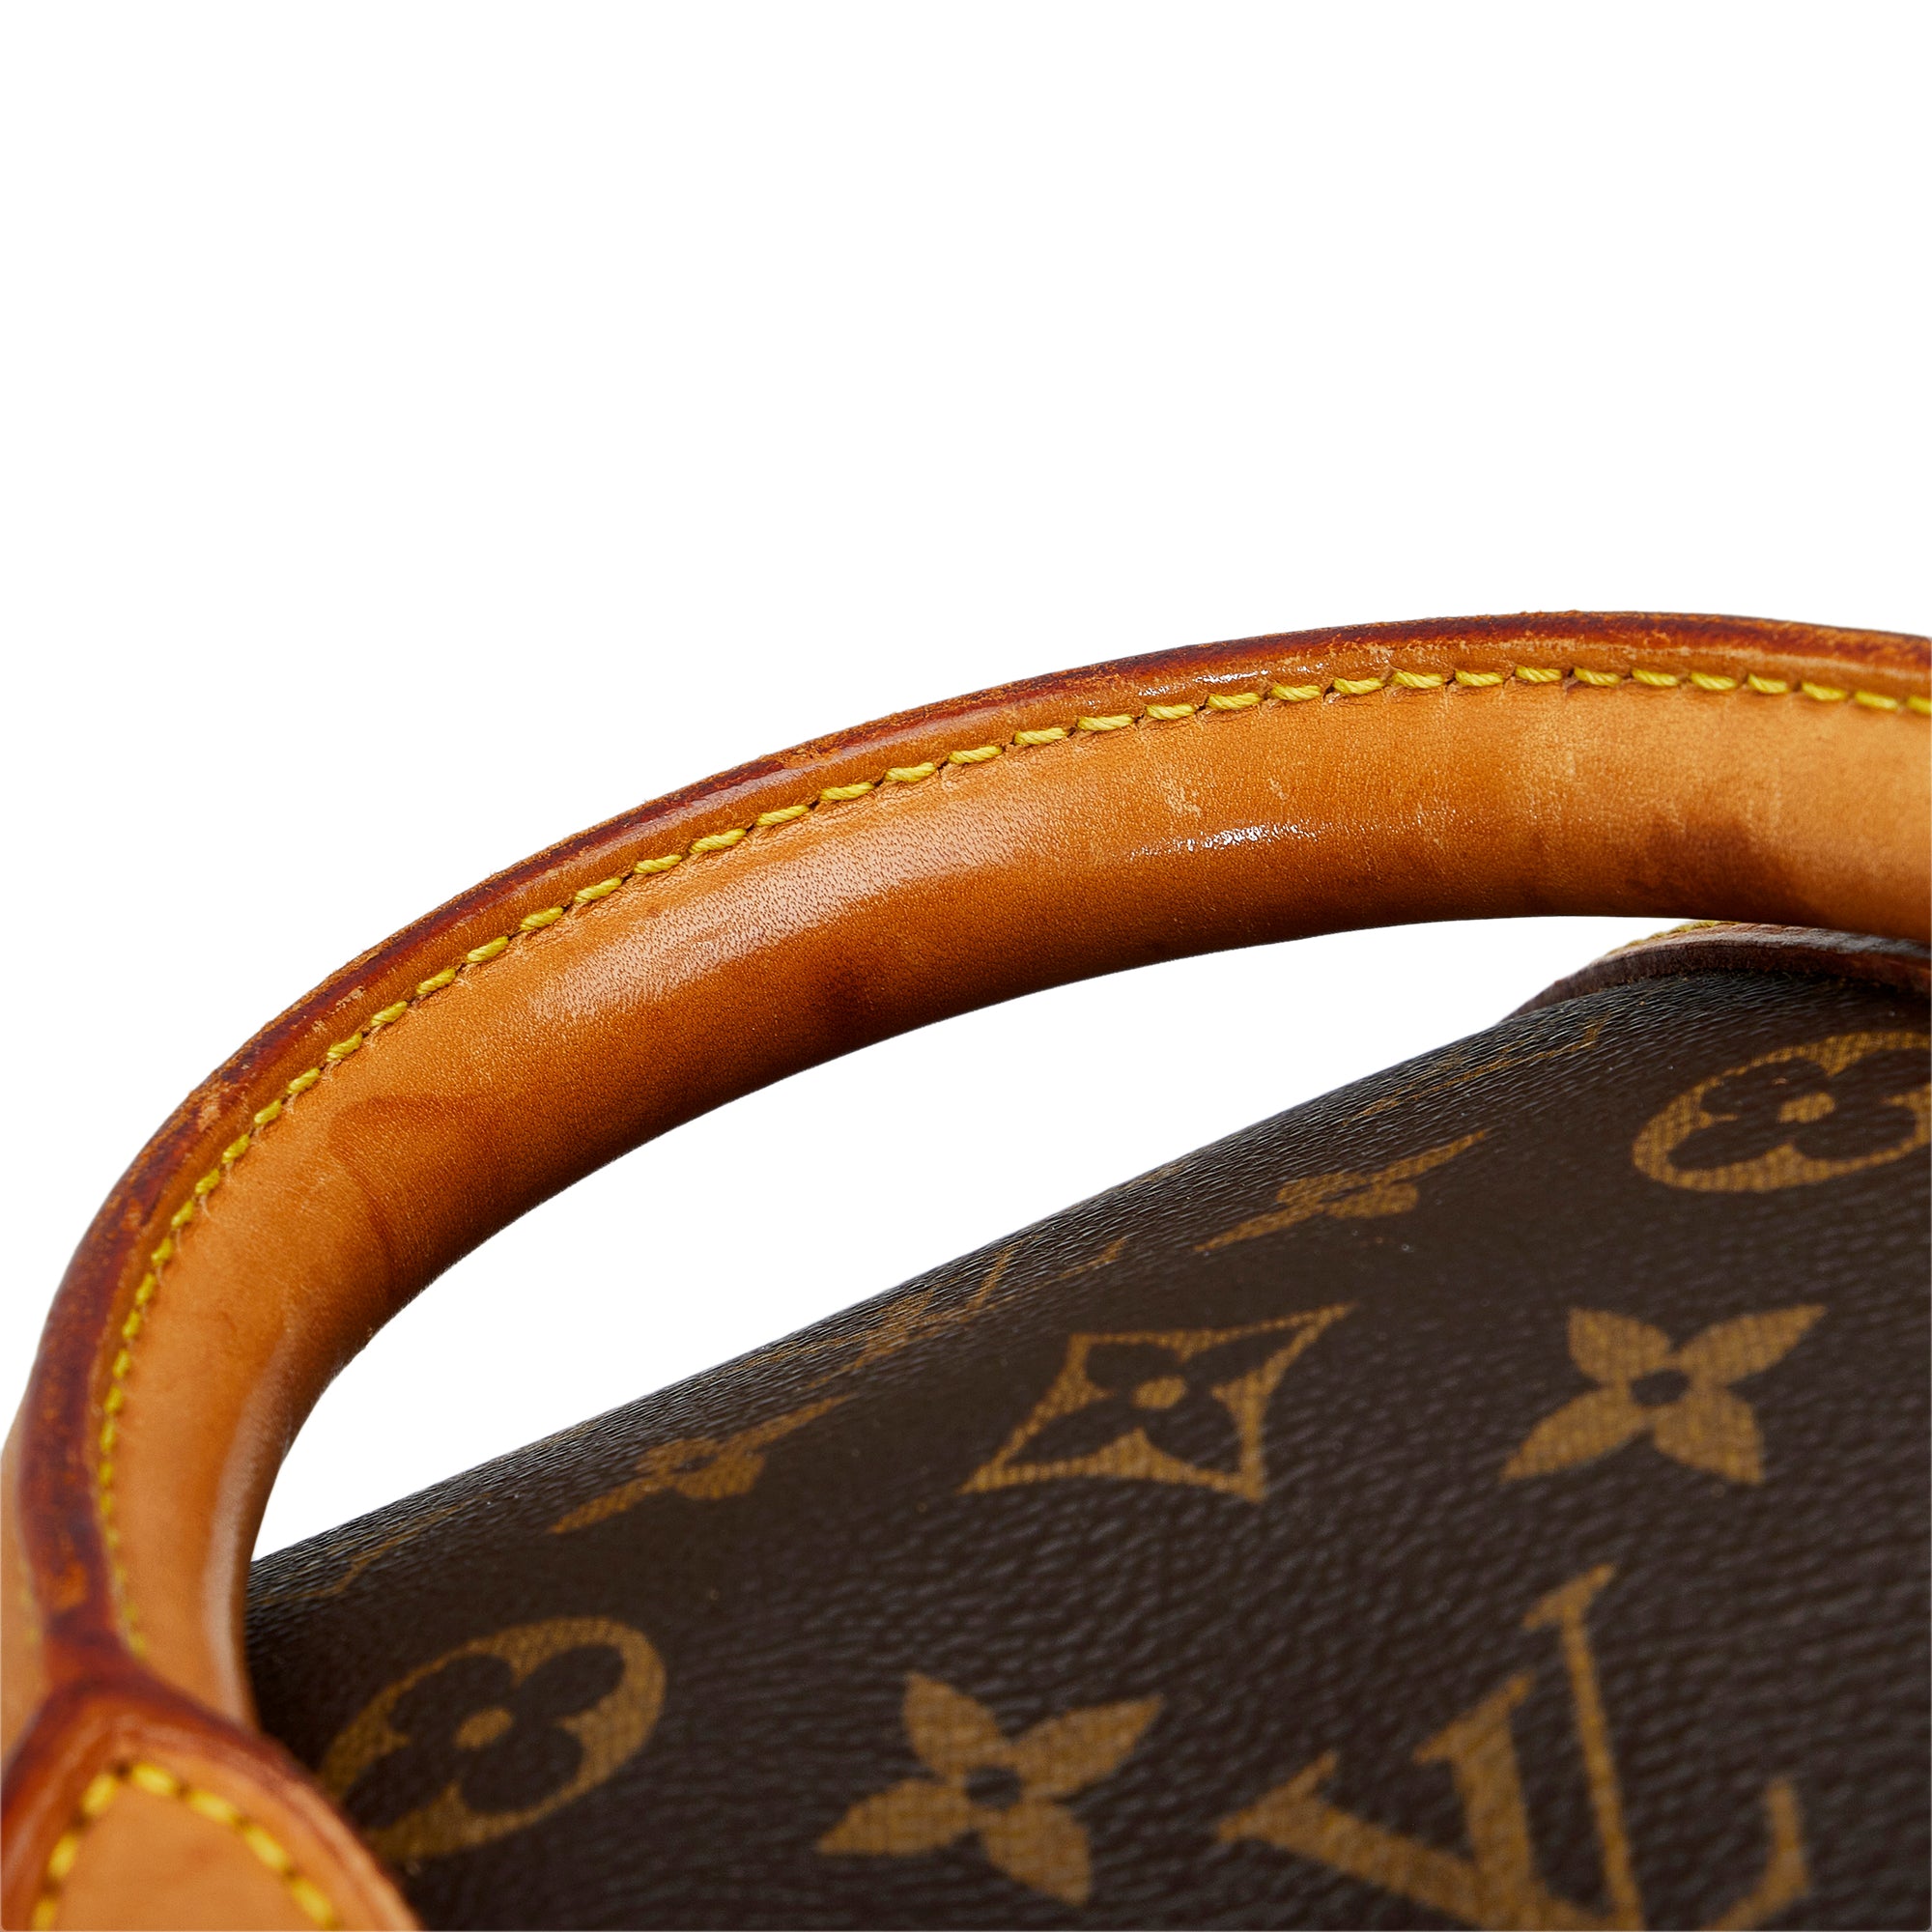 Louis Vuitton Monogram Canvas and Leather Keepall Bandouliere 55 bag